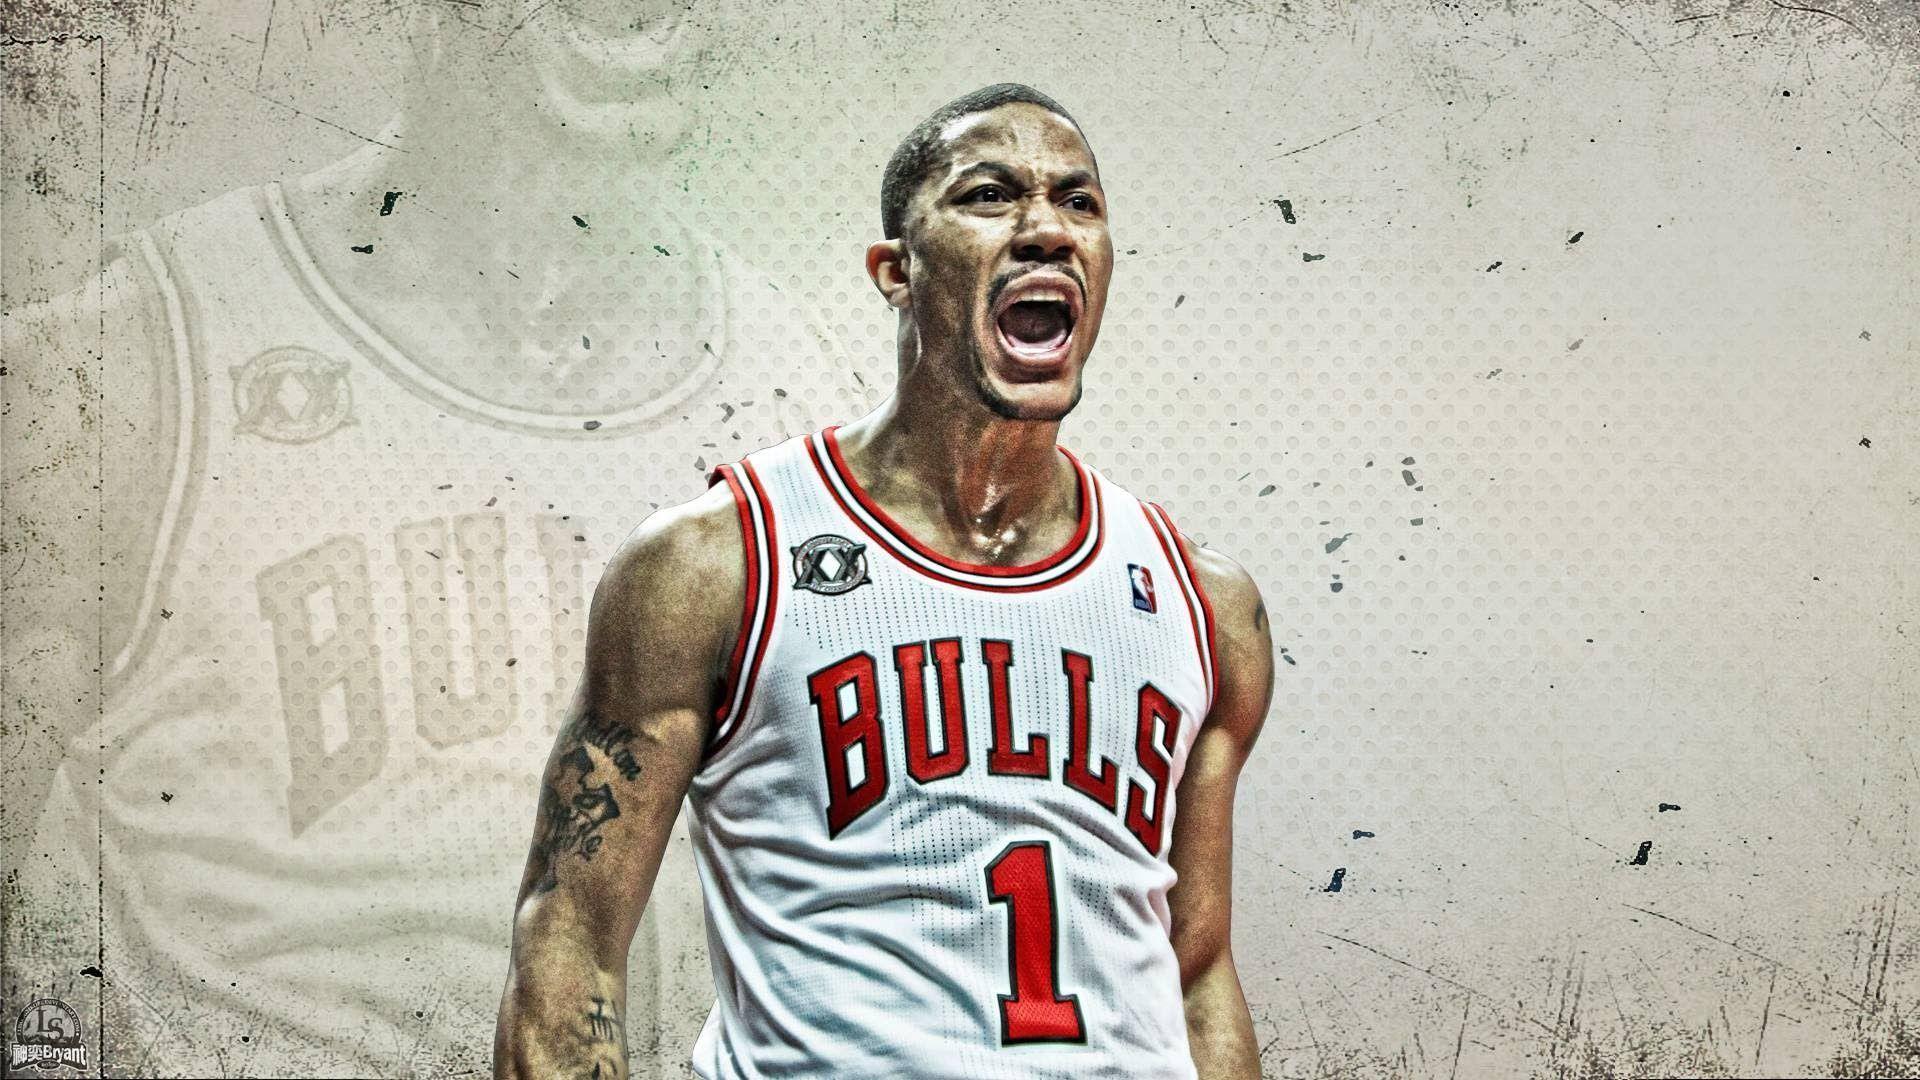 Derrick Rose- "Ready For a Change" "HD"